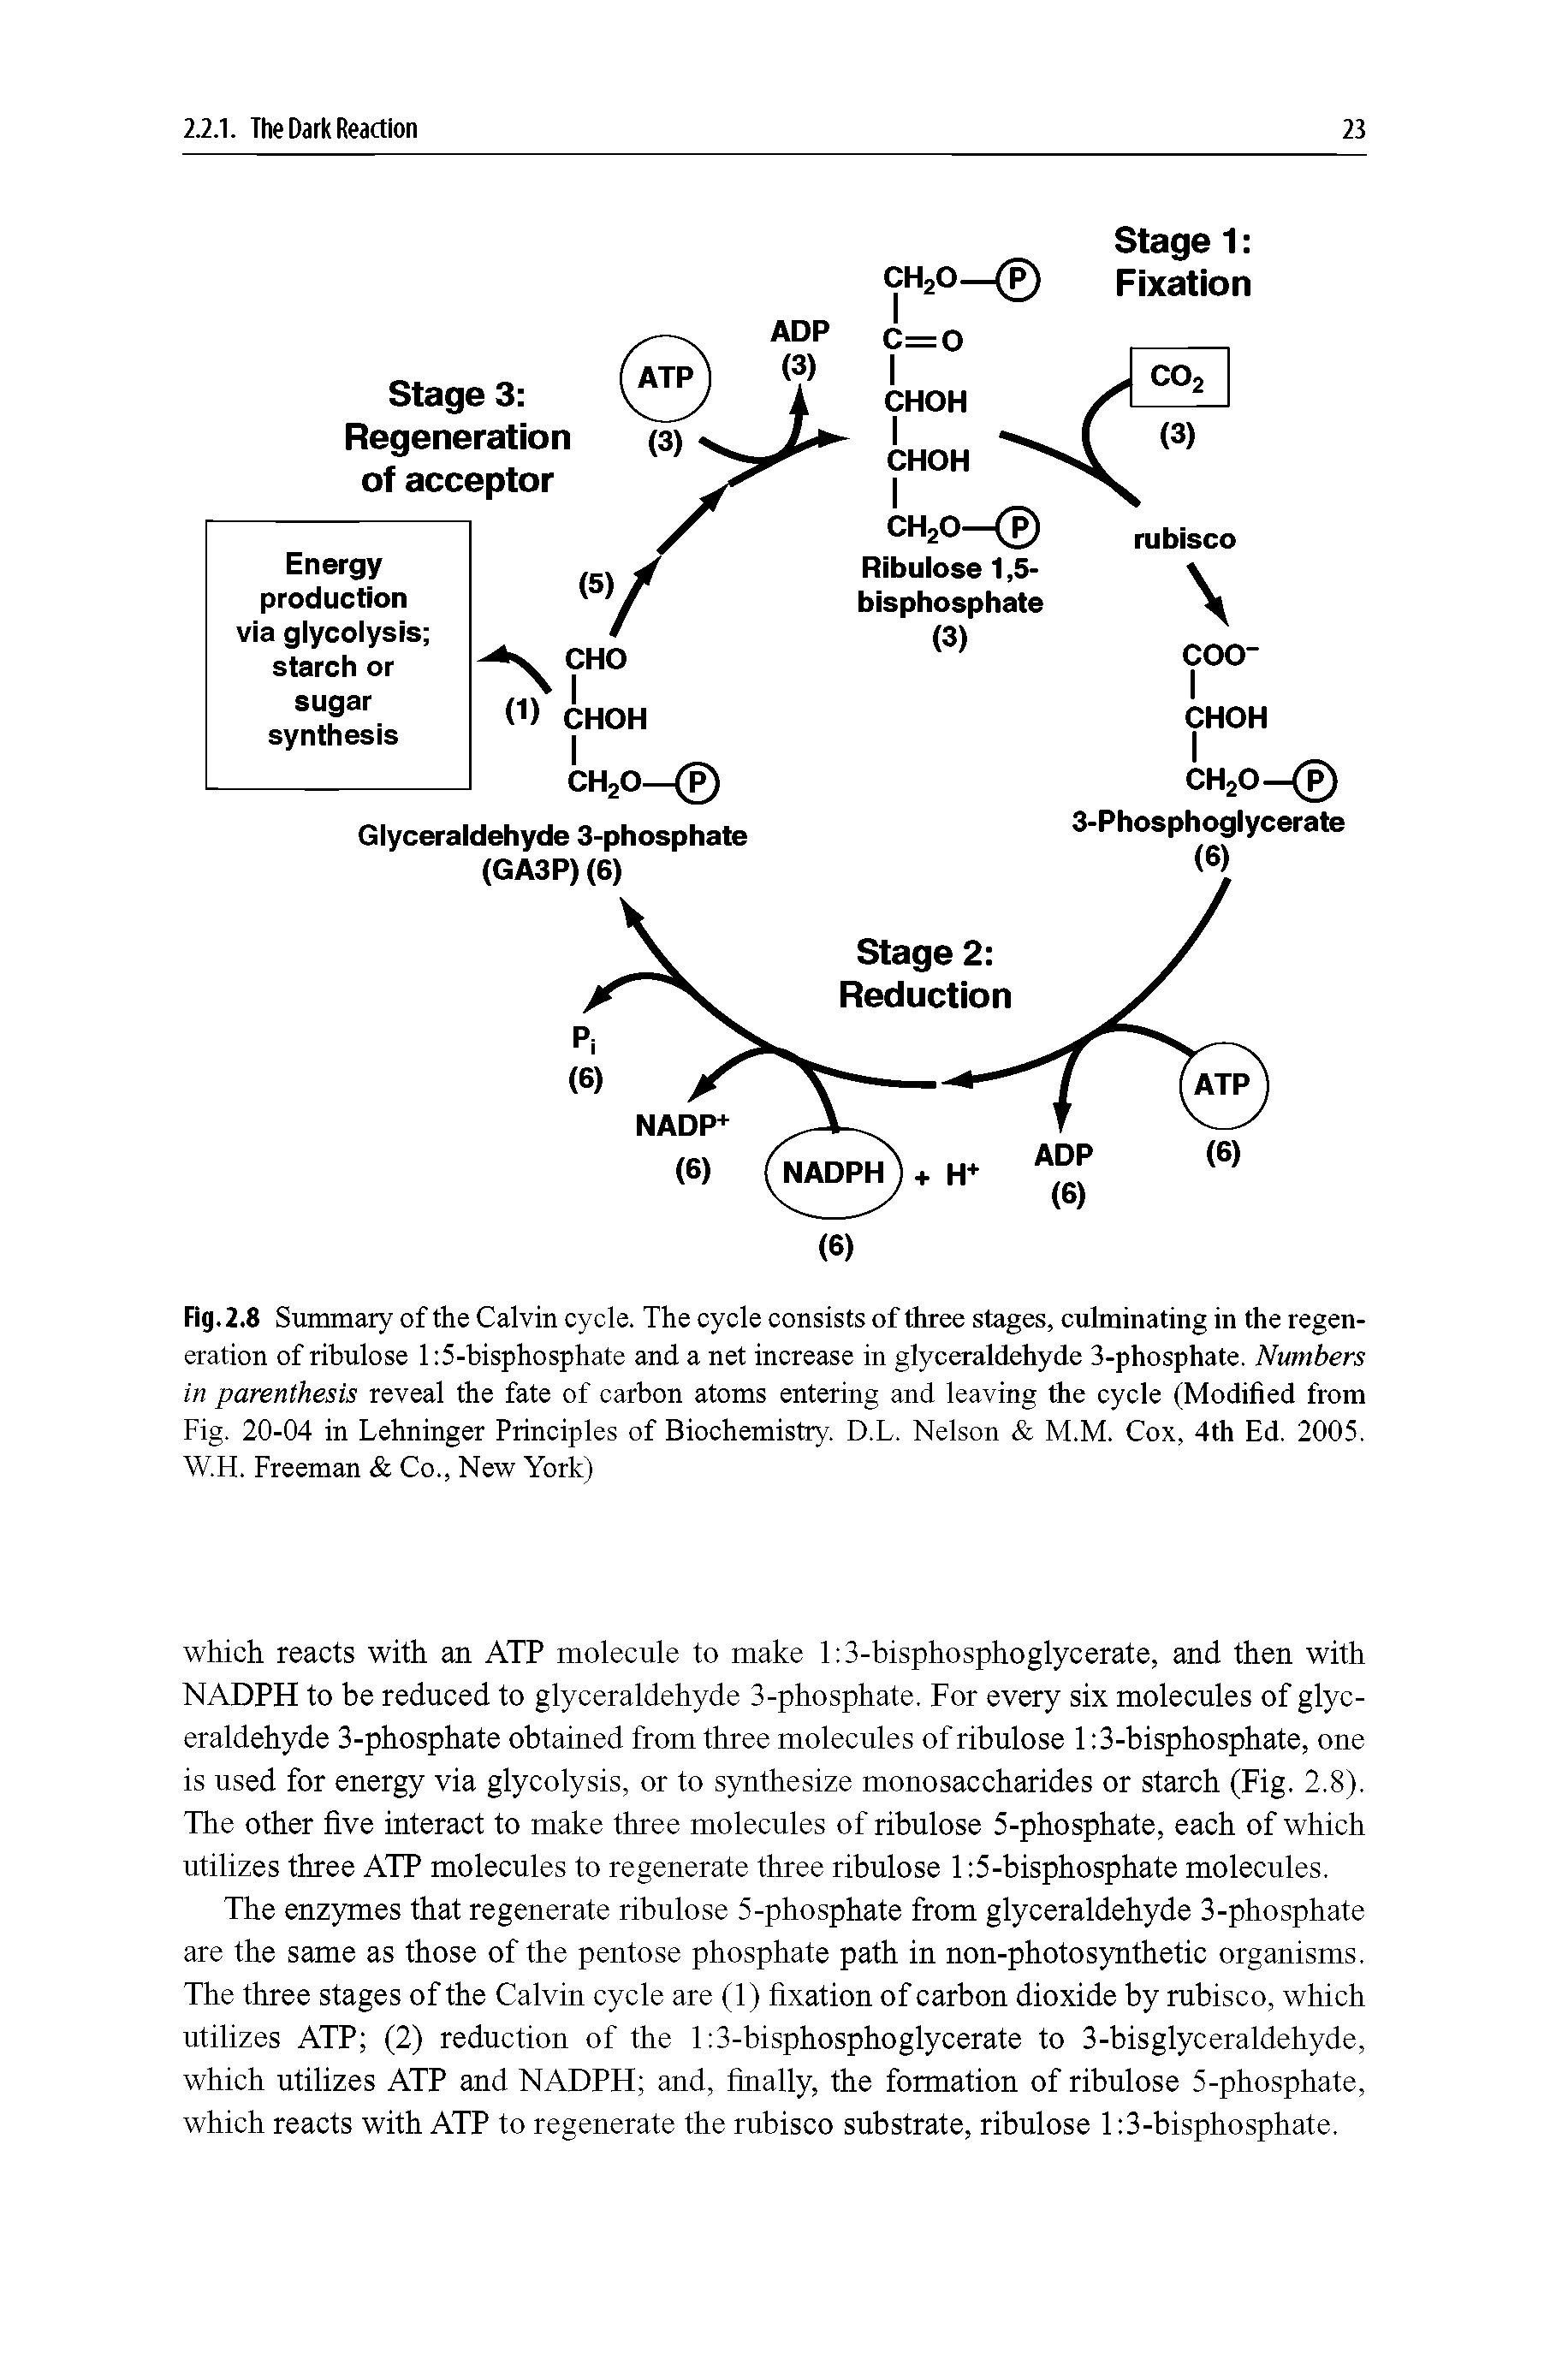 Fig. 2.8 Summary of the Calvin cycle. The cycle consists of three stages, culminating in the regeneration of ribulose 1 5-bisphosphate and a net increase in glyceraldehyde 3-phosphate. Numbers in parenthesis reveal the fate of carbon atoms entering and leaving the cycle (Modified from Fig. 20-04 in Lehninger Principles of Biochemistry. D.L. Nelson M.M. Cox, 4th Ed. 2005. W.H. Freeman Co., New York)...